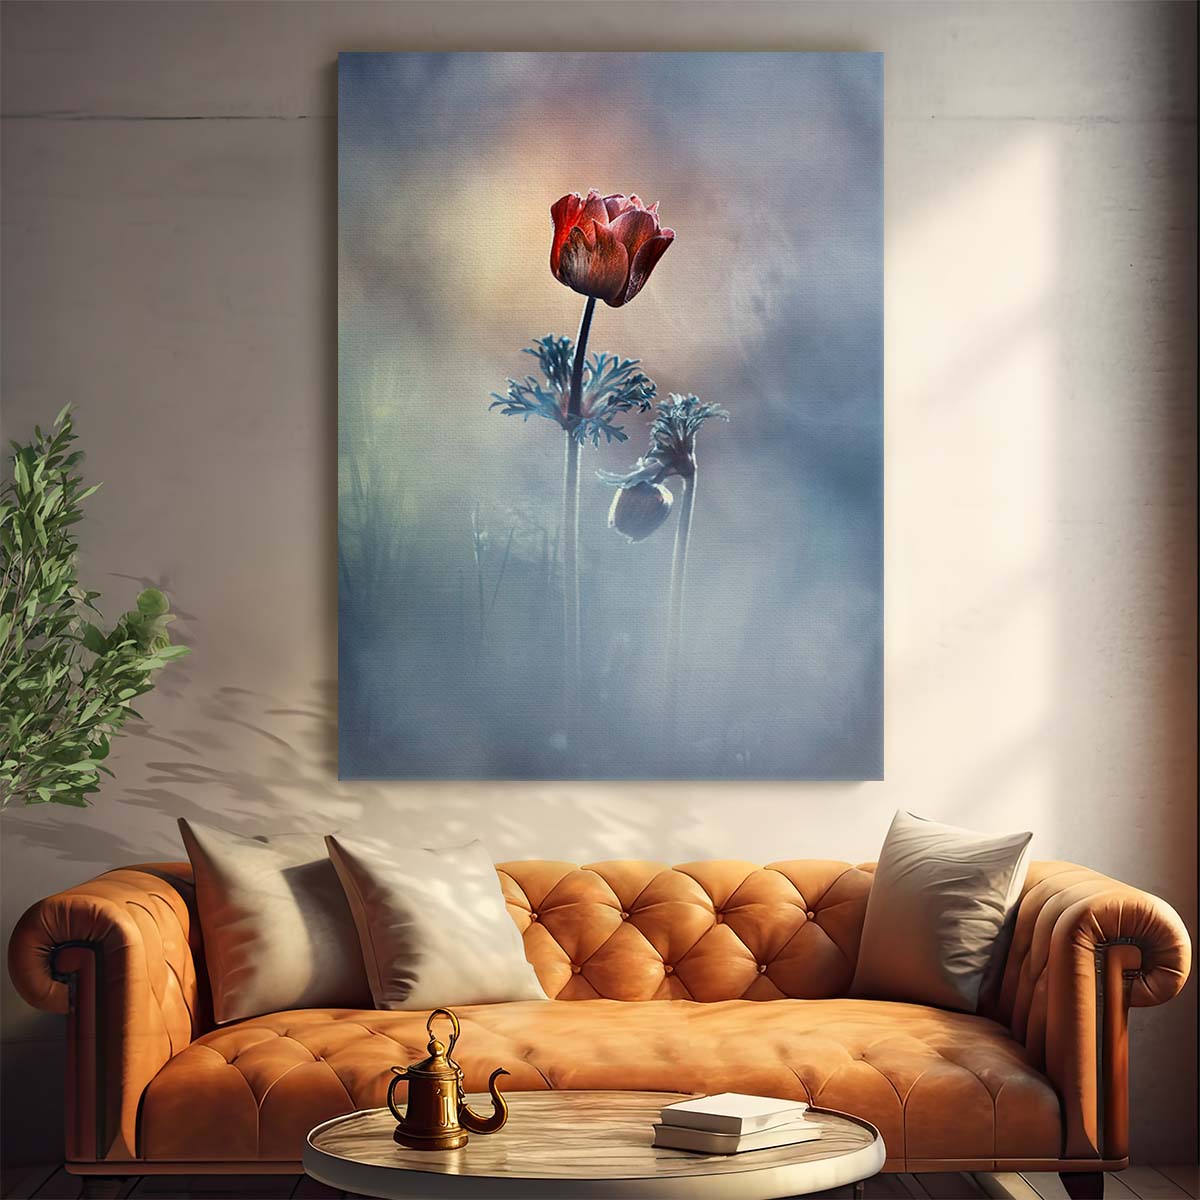 Romantic Red Rose Macro Photography Wall Art by Fabien Bravin by Luxuriance Designs, made in USA